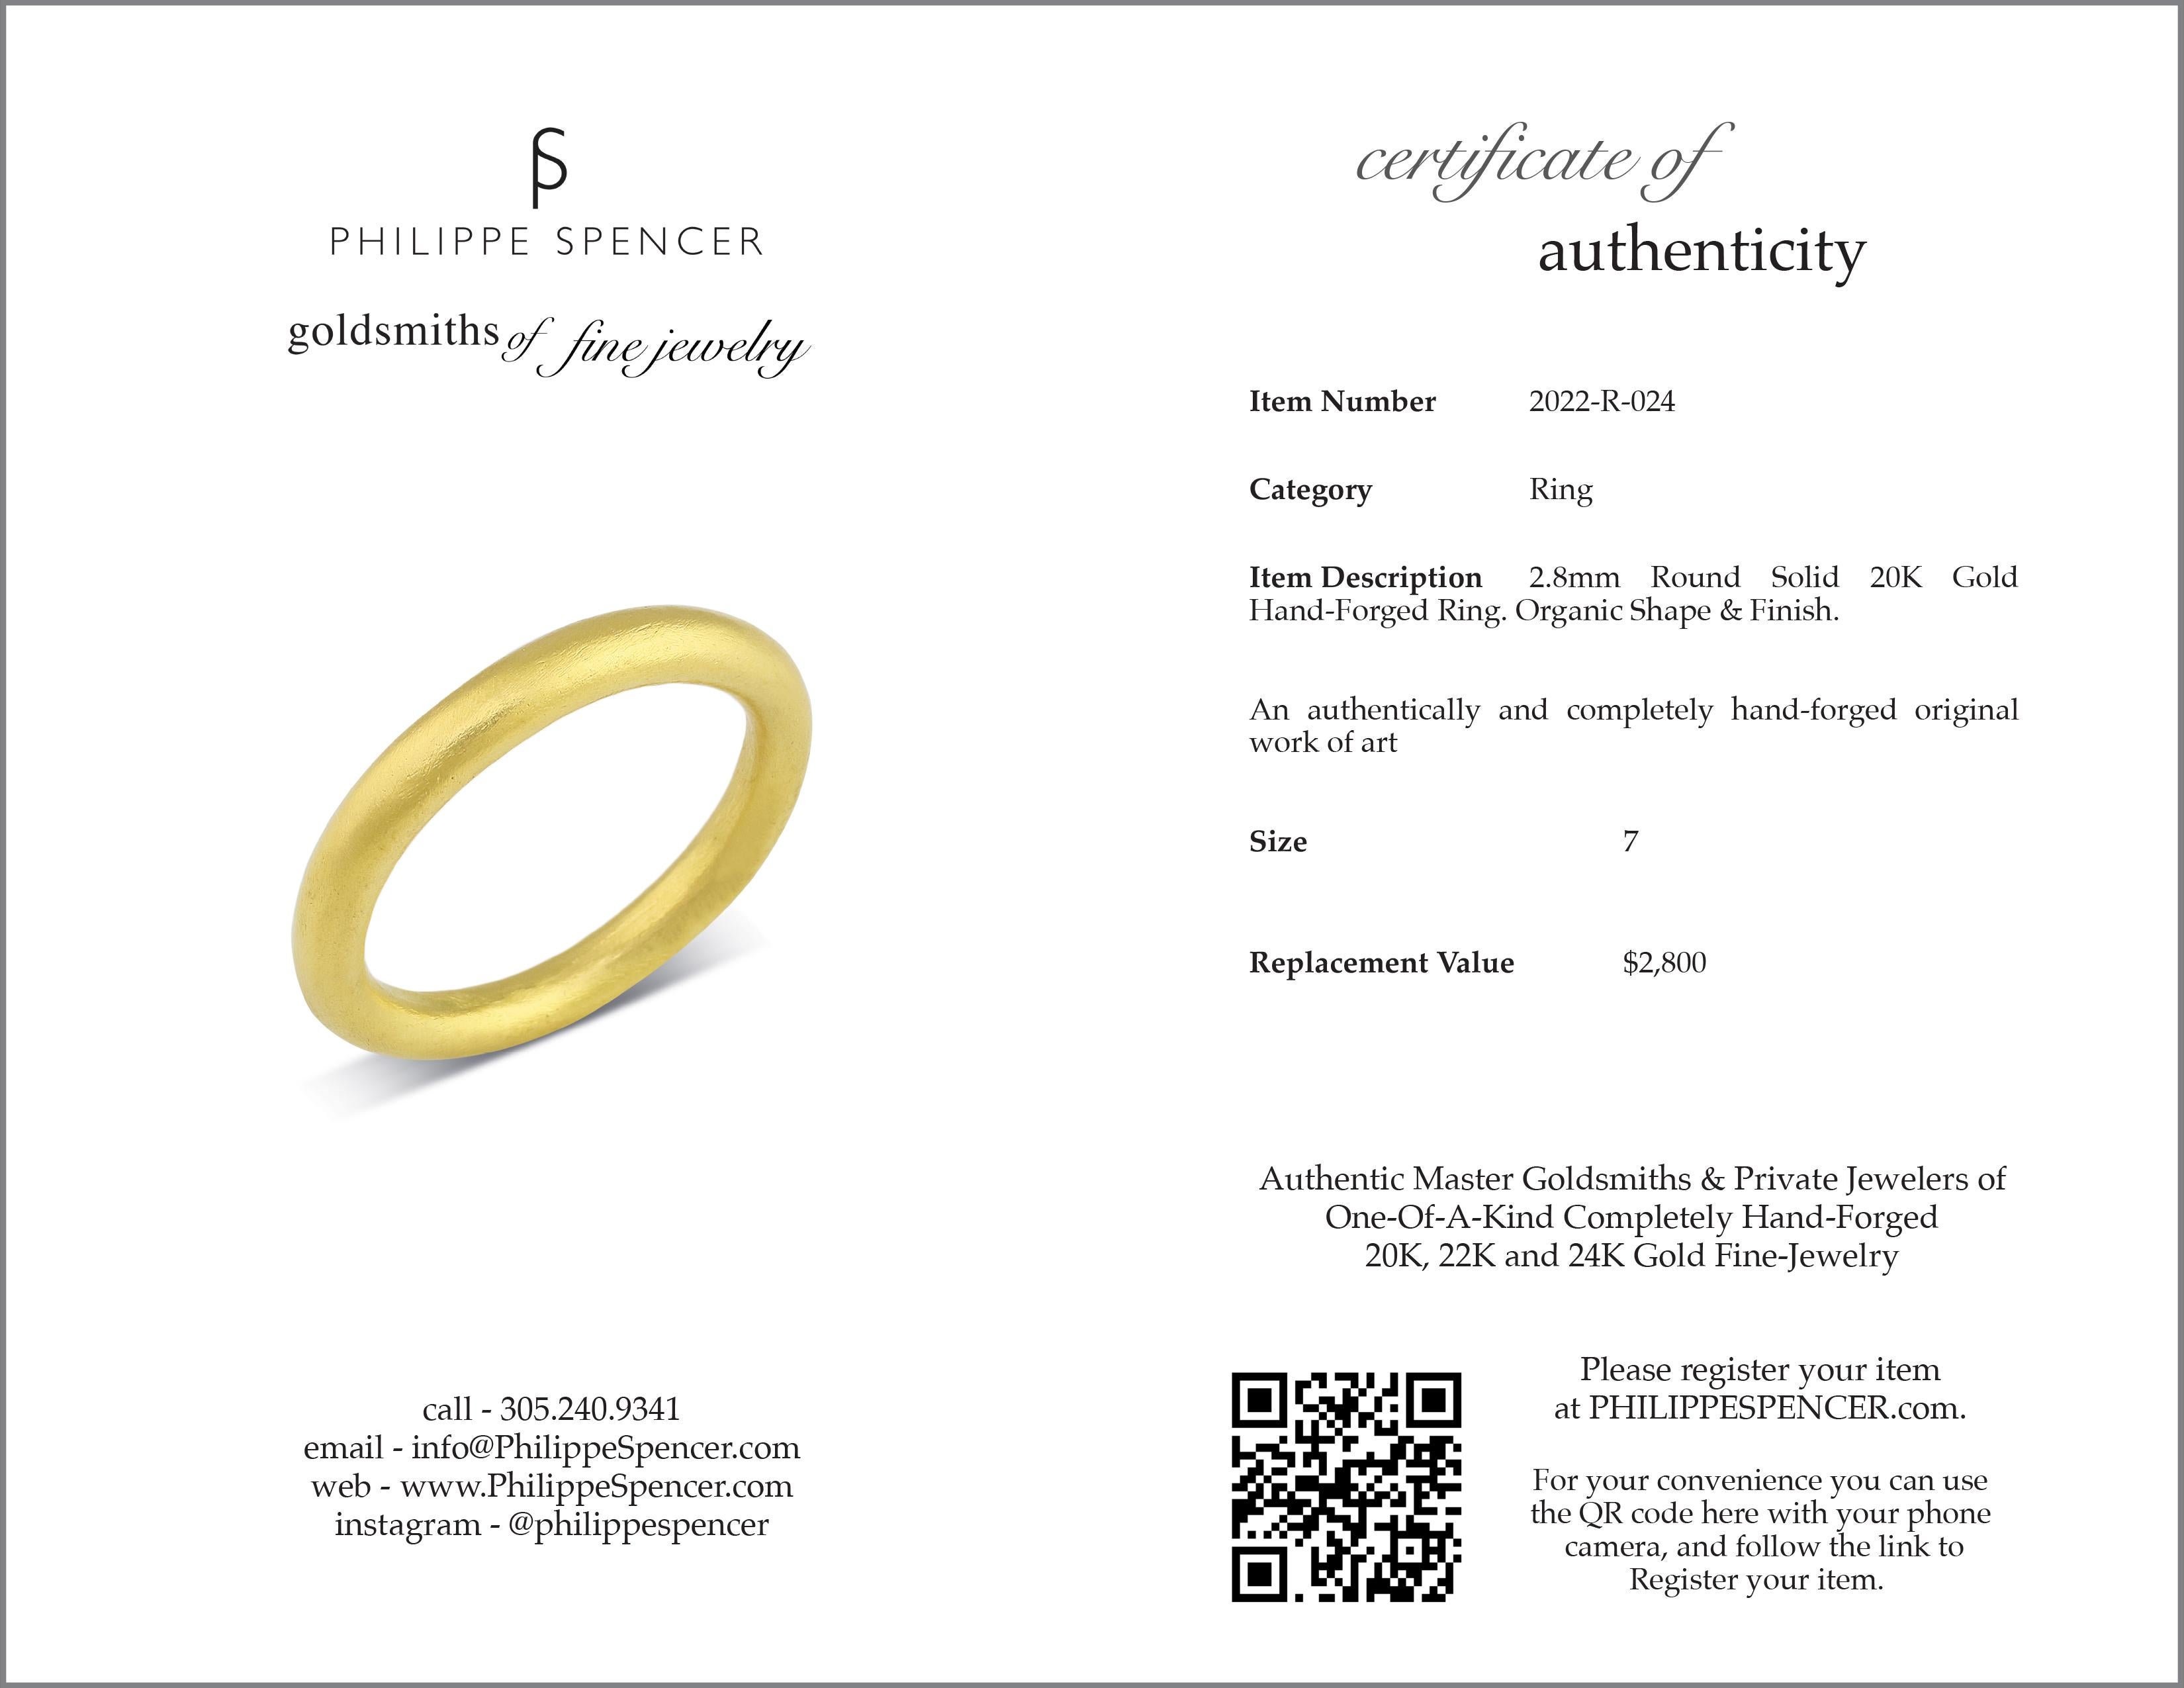 Artisan PHILIPPE SPENCER Solid 20K Gold Hand-Forged 2.8mm Organic Round Ring For Sale